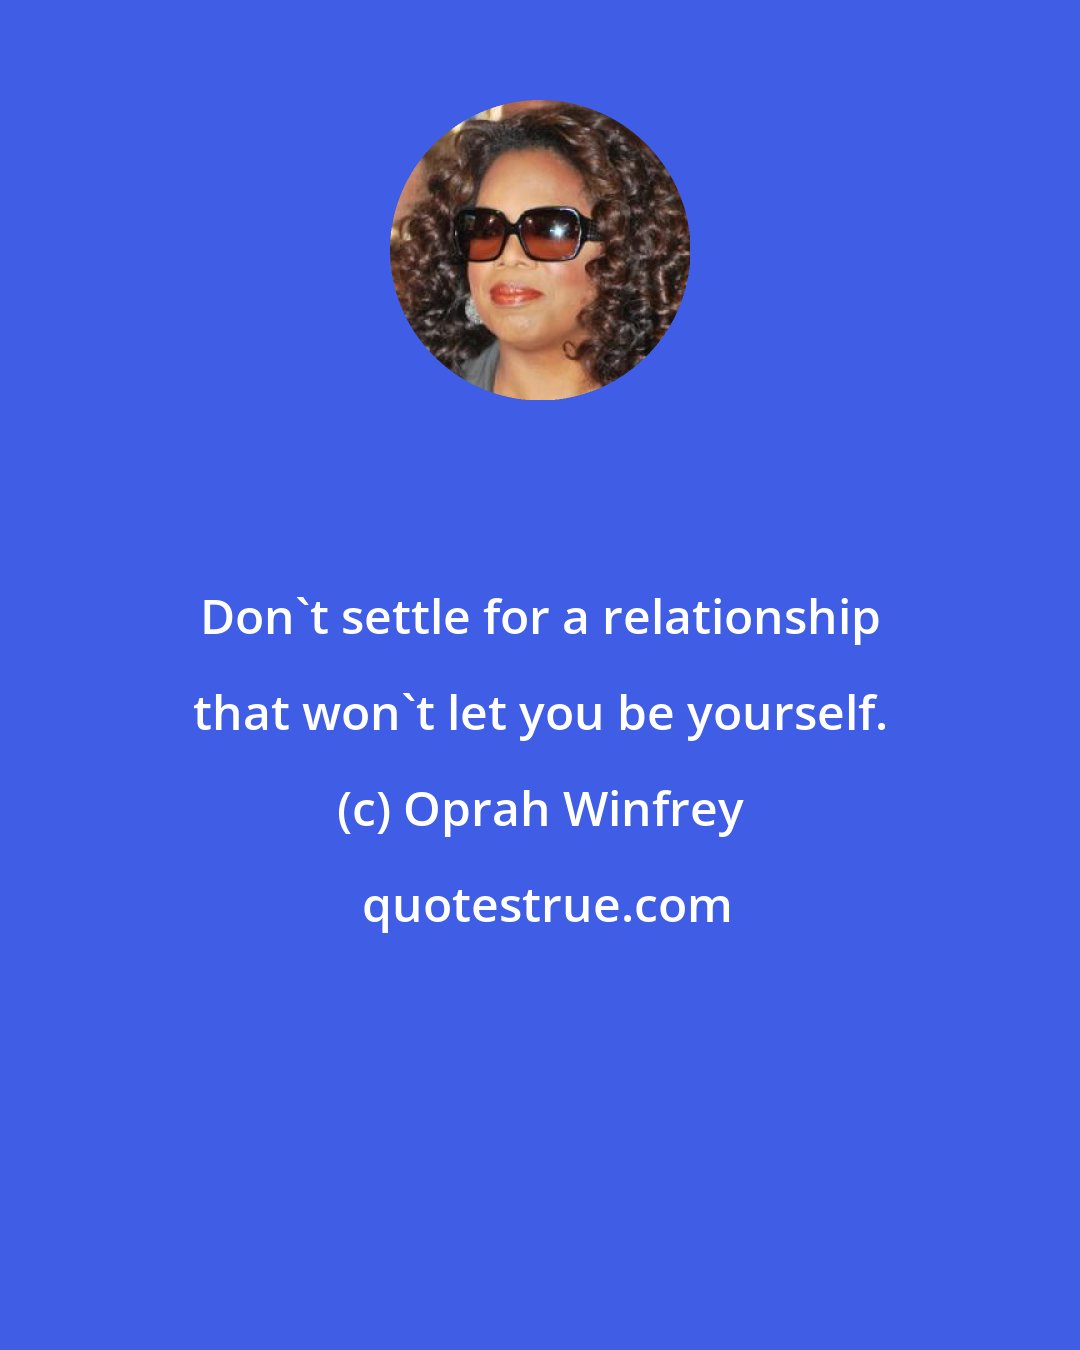 Oprah Winfrey: Don't settle for a relationship that won't let you be yourself.